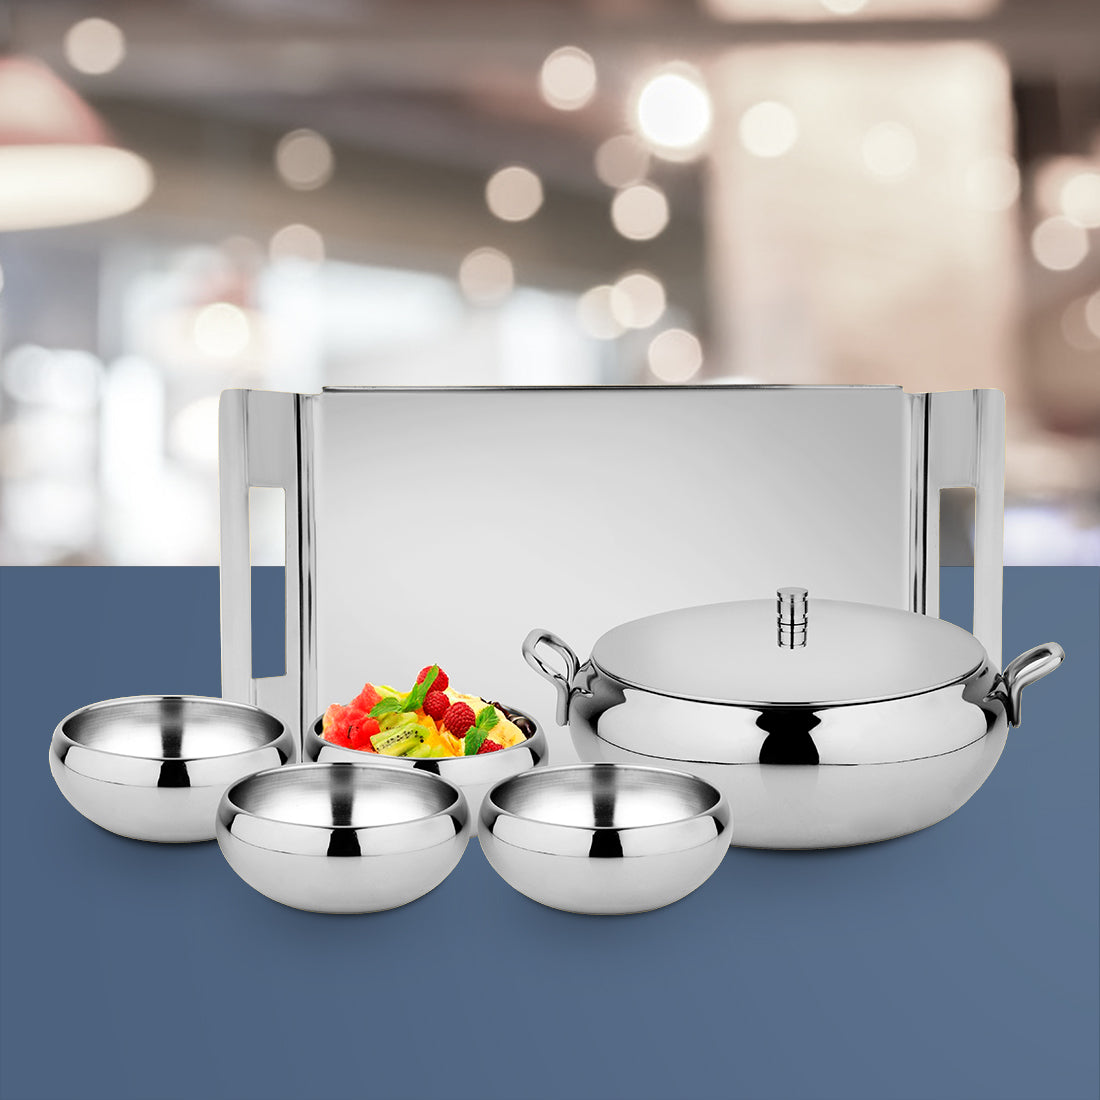 Stainless Steel Serving Set Farm House